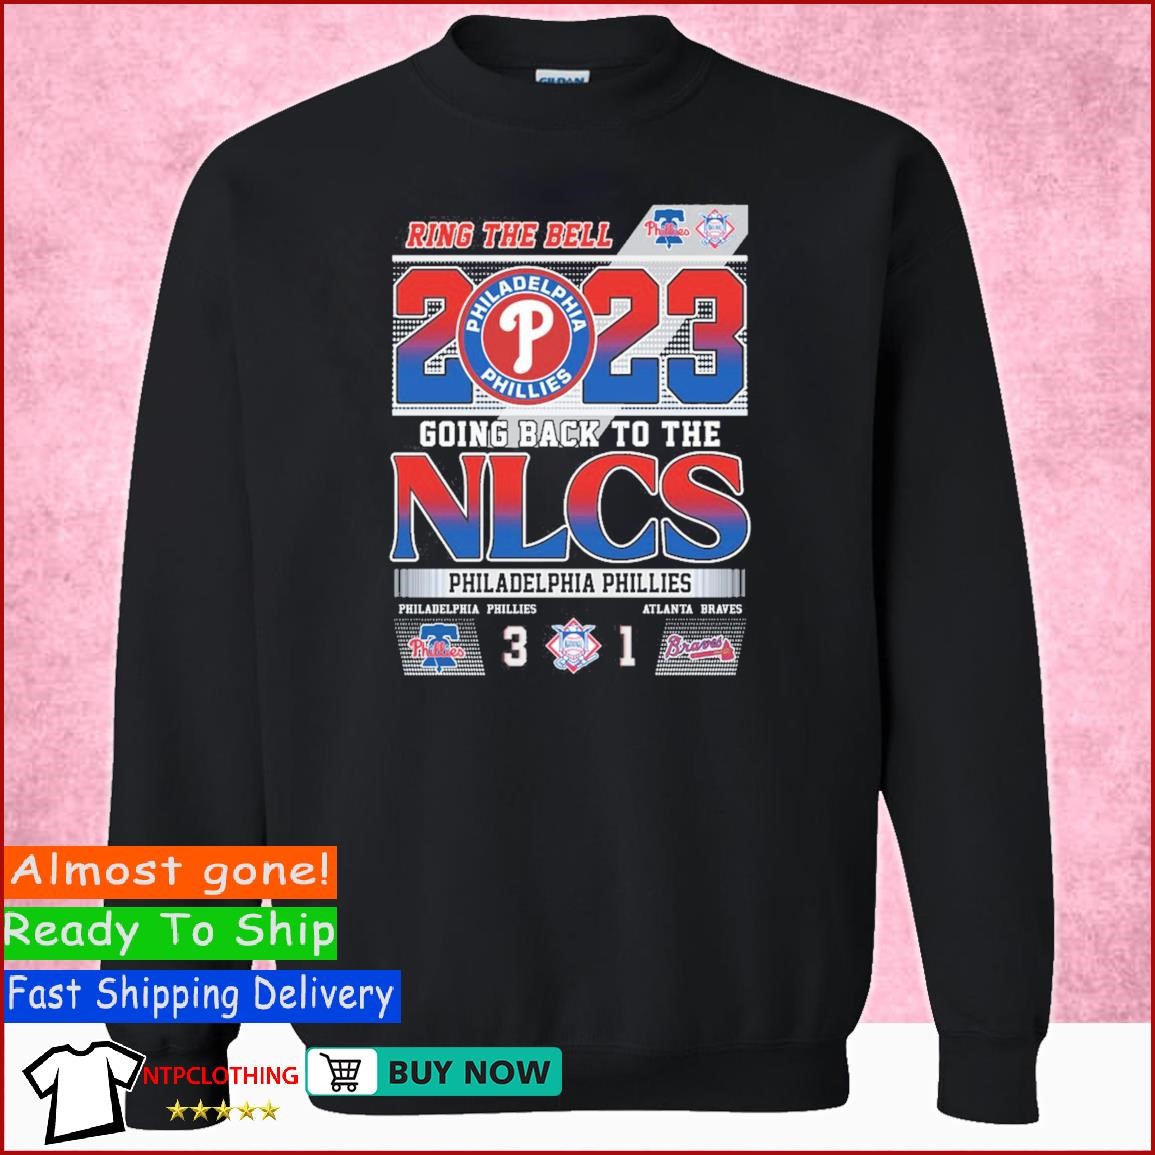 Philadelphia Phillies baseball ring the bell 2022 T-shirt, hoodie, sweater,  long sleeve and tank top